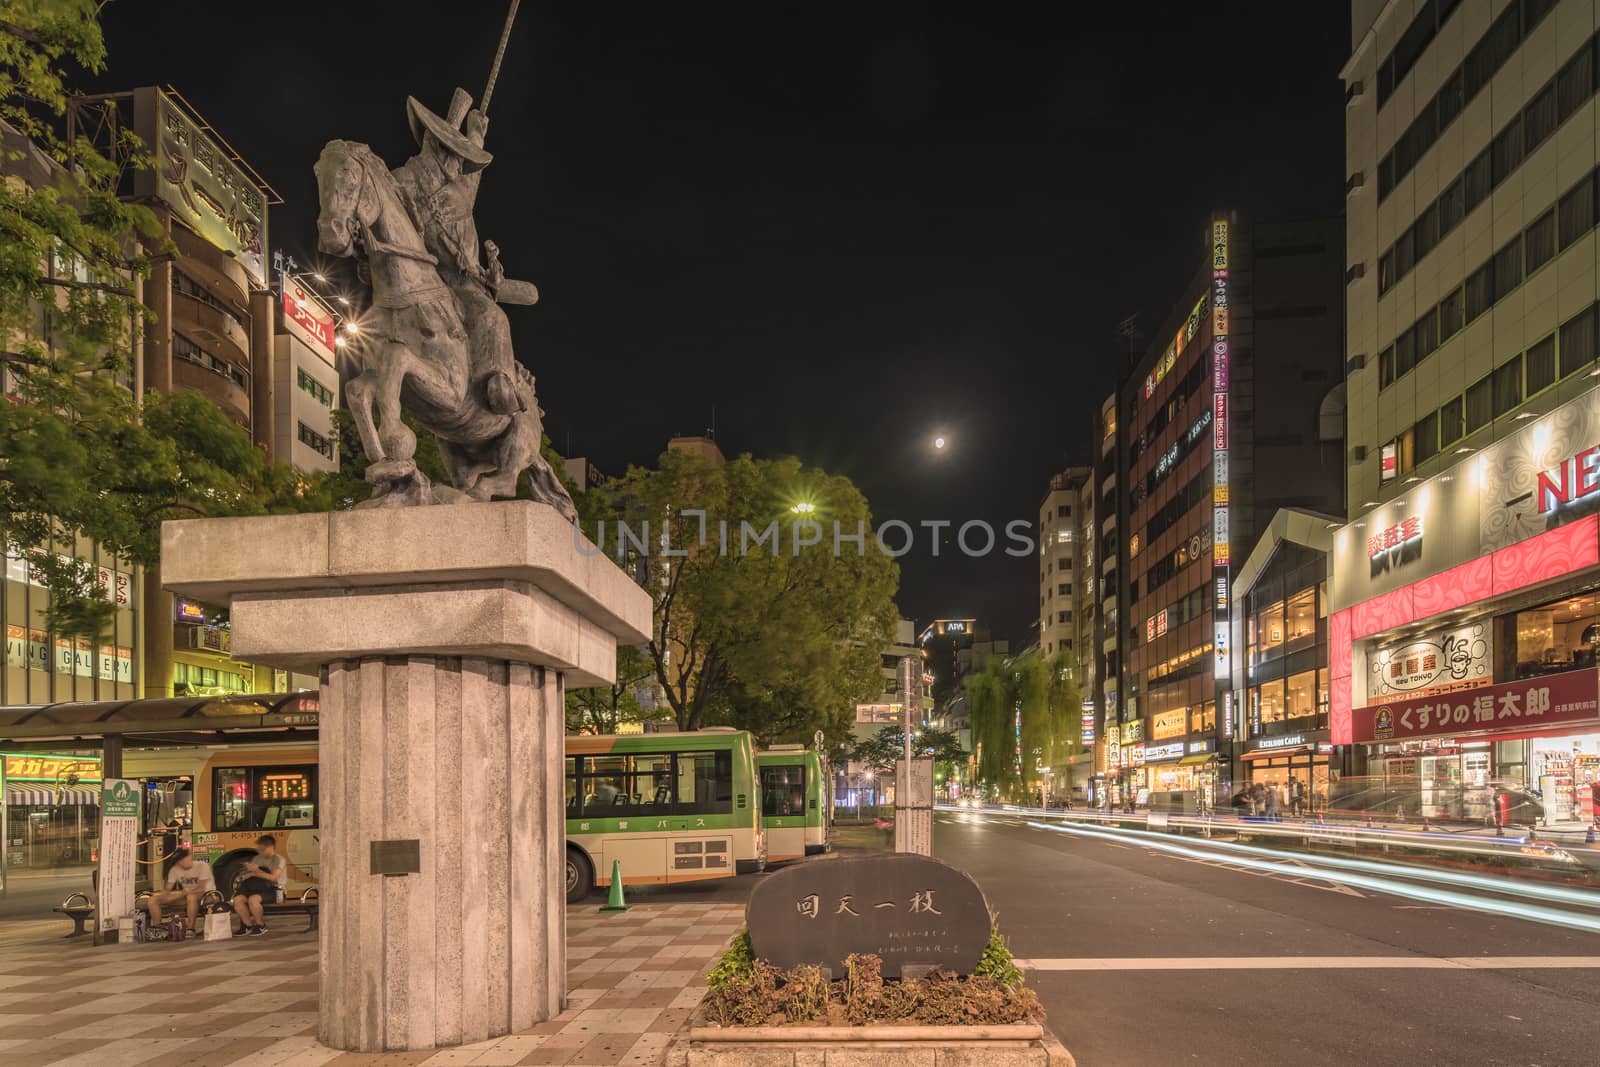 Night view of the square in front of the Nippori train station by kuremo